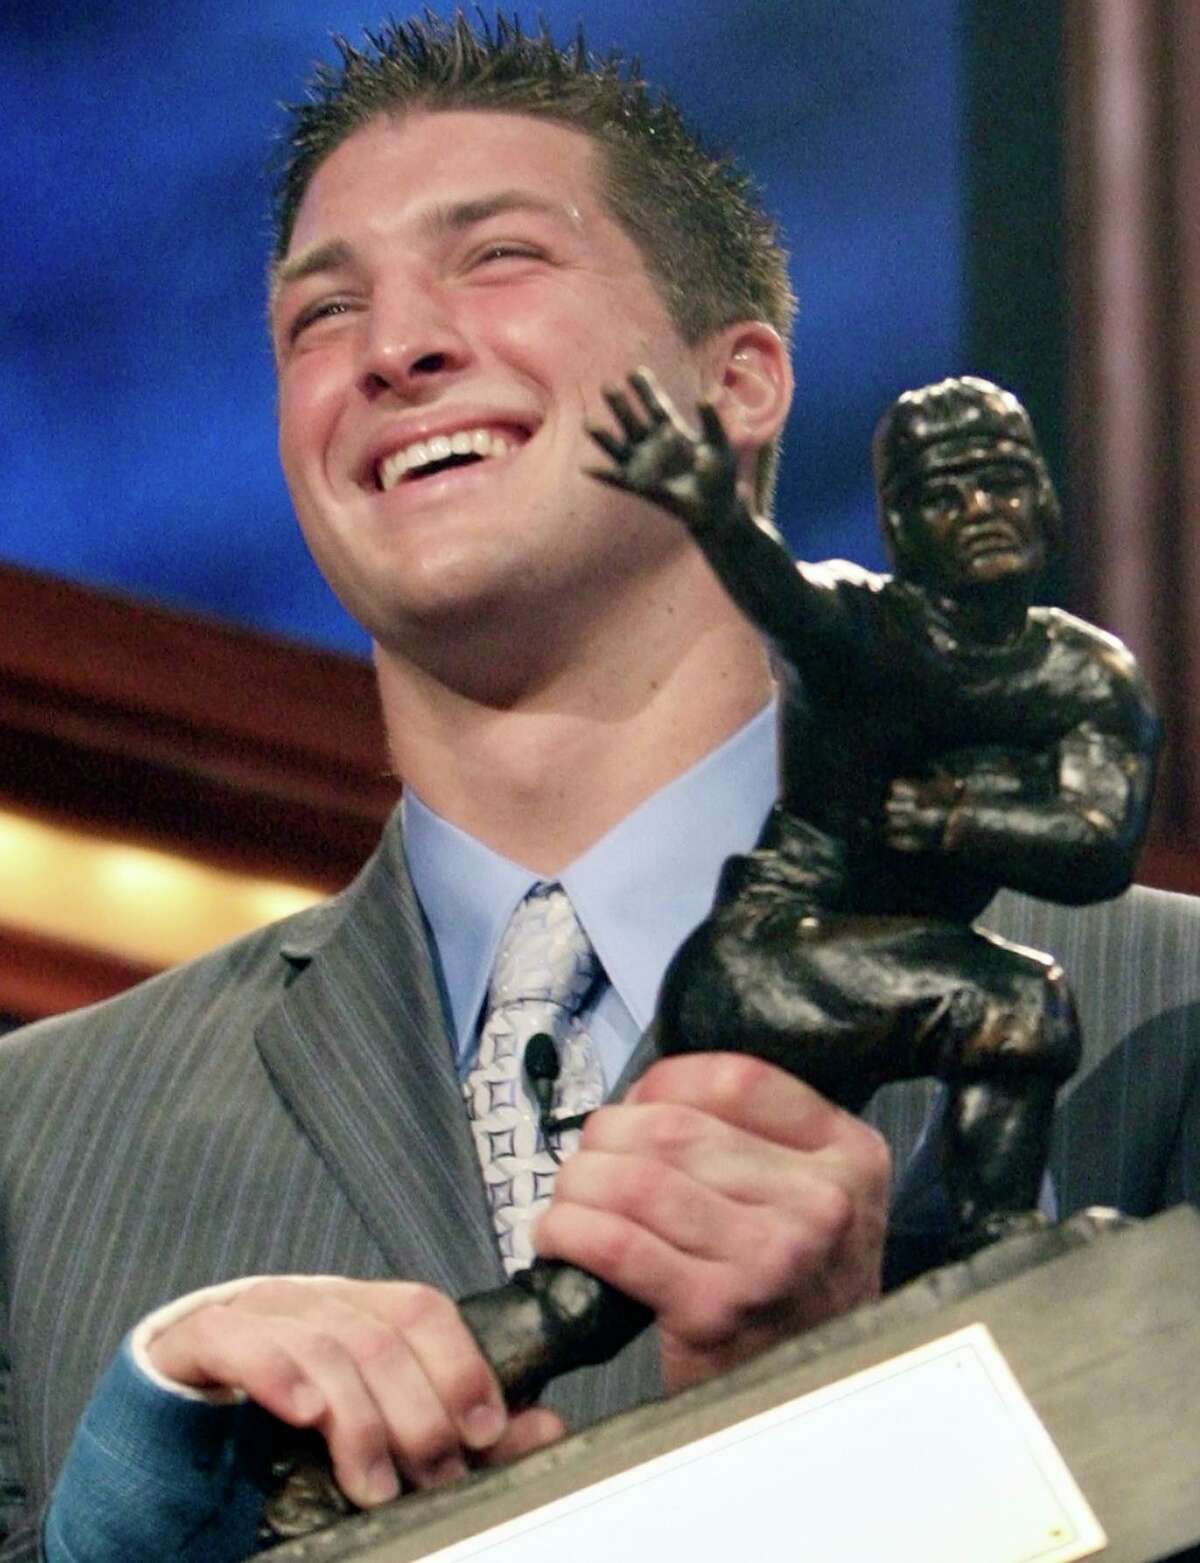 FILE - Florida quarterback Tim Tebow holds up the Heisman Trophy after winning the award Saturday, Dec. 8, 2007 in New York. Tebow was elected to the College Football Hall of Fame, Monday, Jan. 9, 2023. (AP Photo/Kelly Kline, Pool, File)